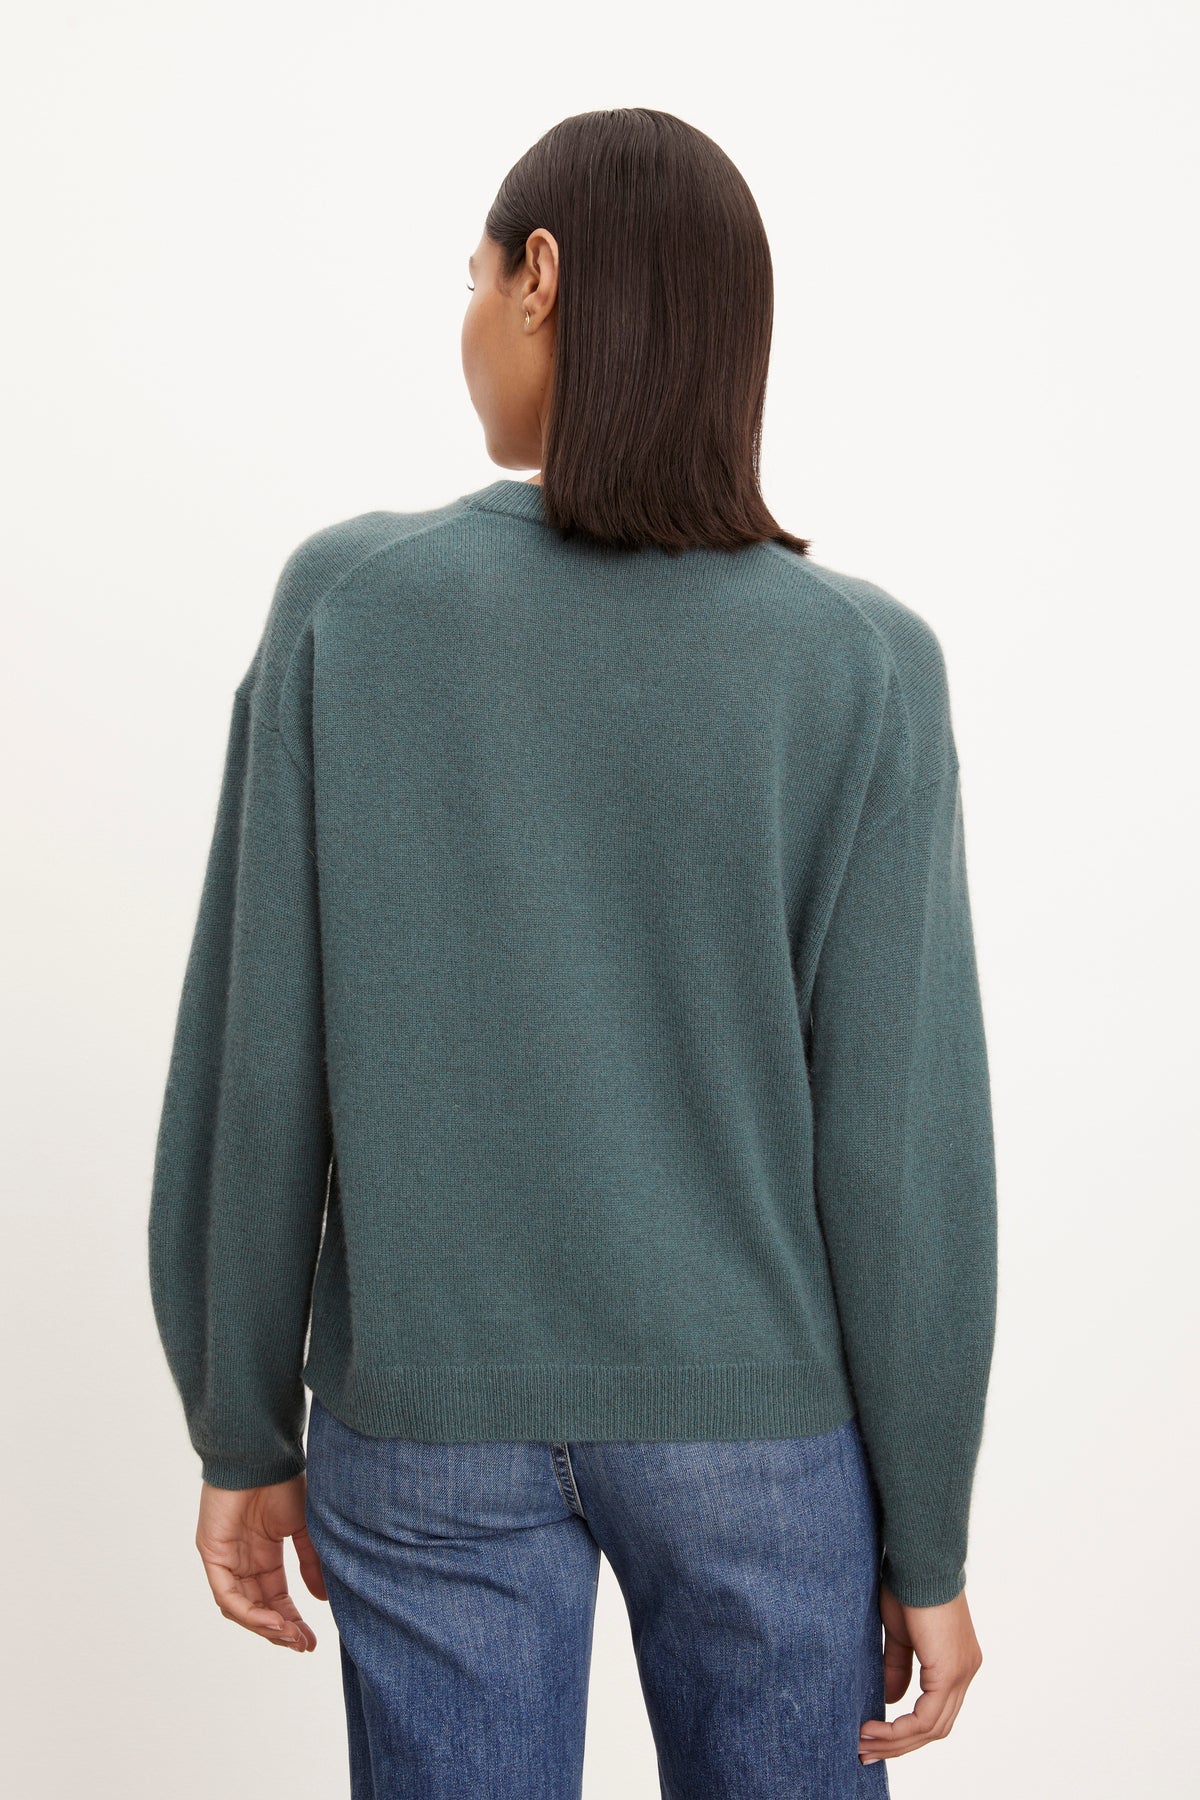 The back view of a woman wearing a Velvet by Graham & Spencer BRYNNE CASHMERE CREW NECK SWEATER and jeans.-26883604414657